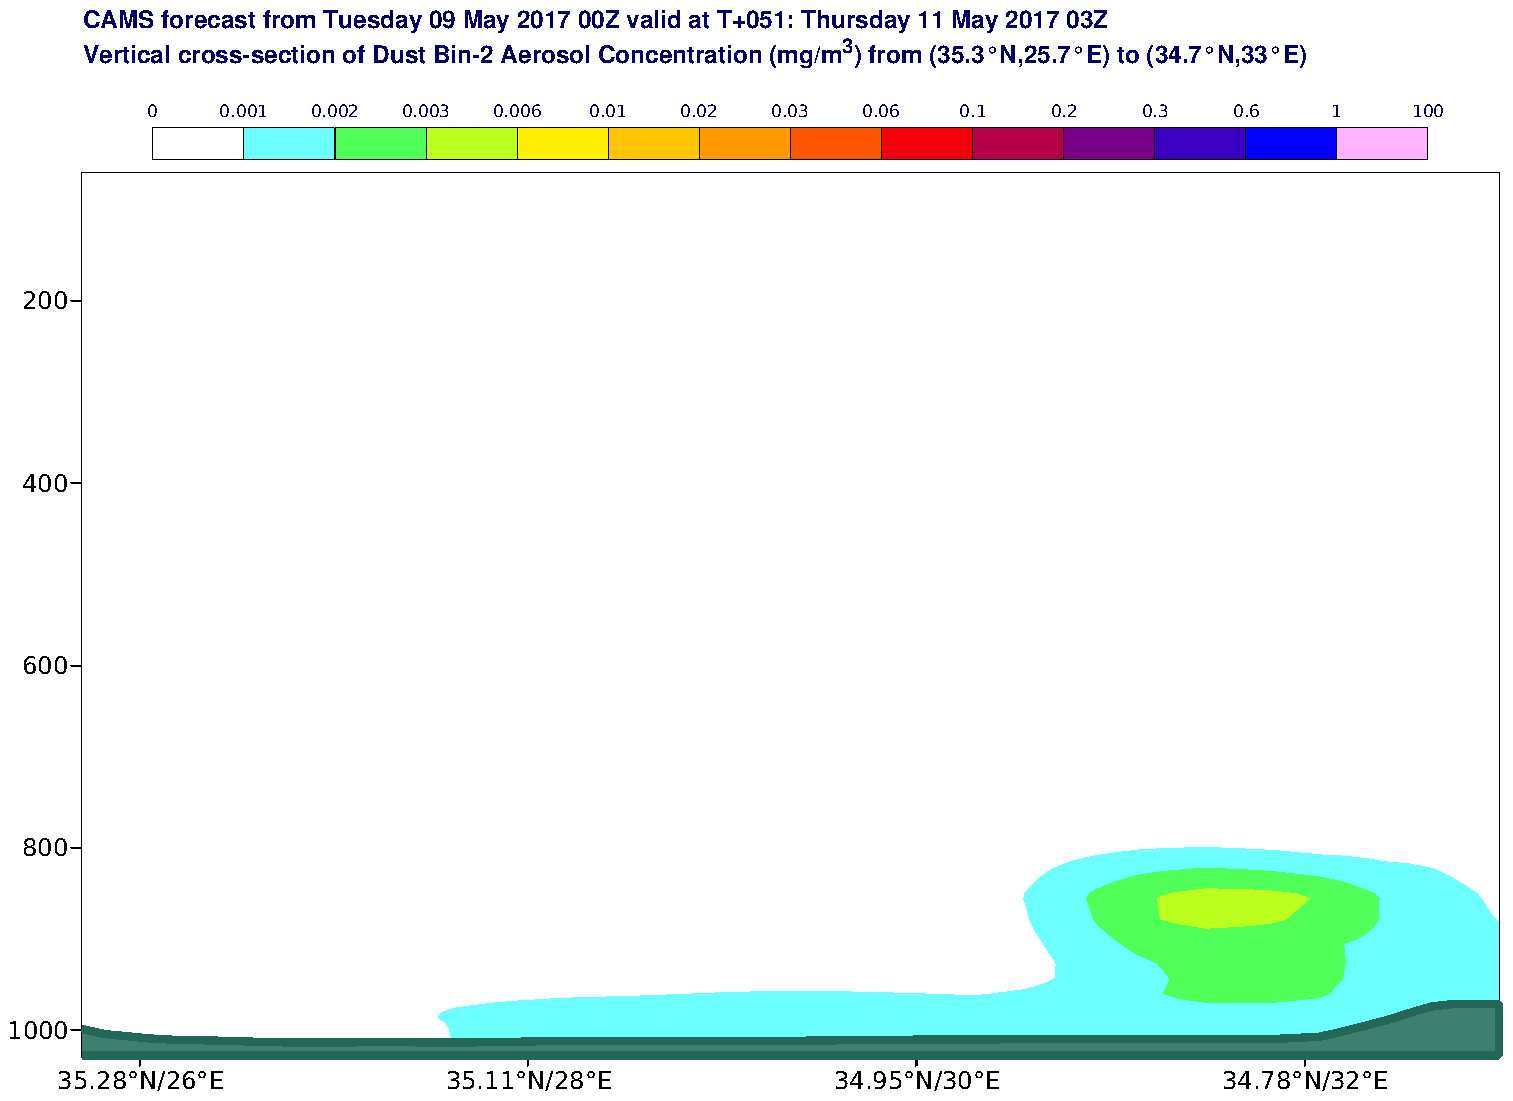 Vertical cross-section of Dust Bin-2 Aerosol Concentration (mg/m3) valid at T51 - 2017-05-11 03:00